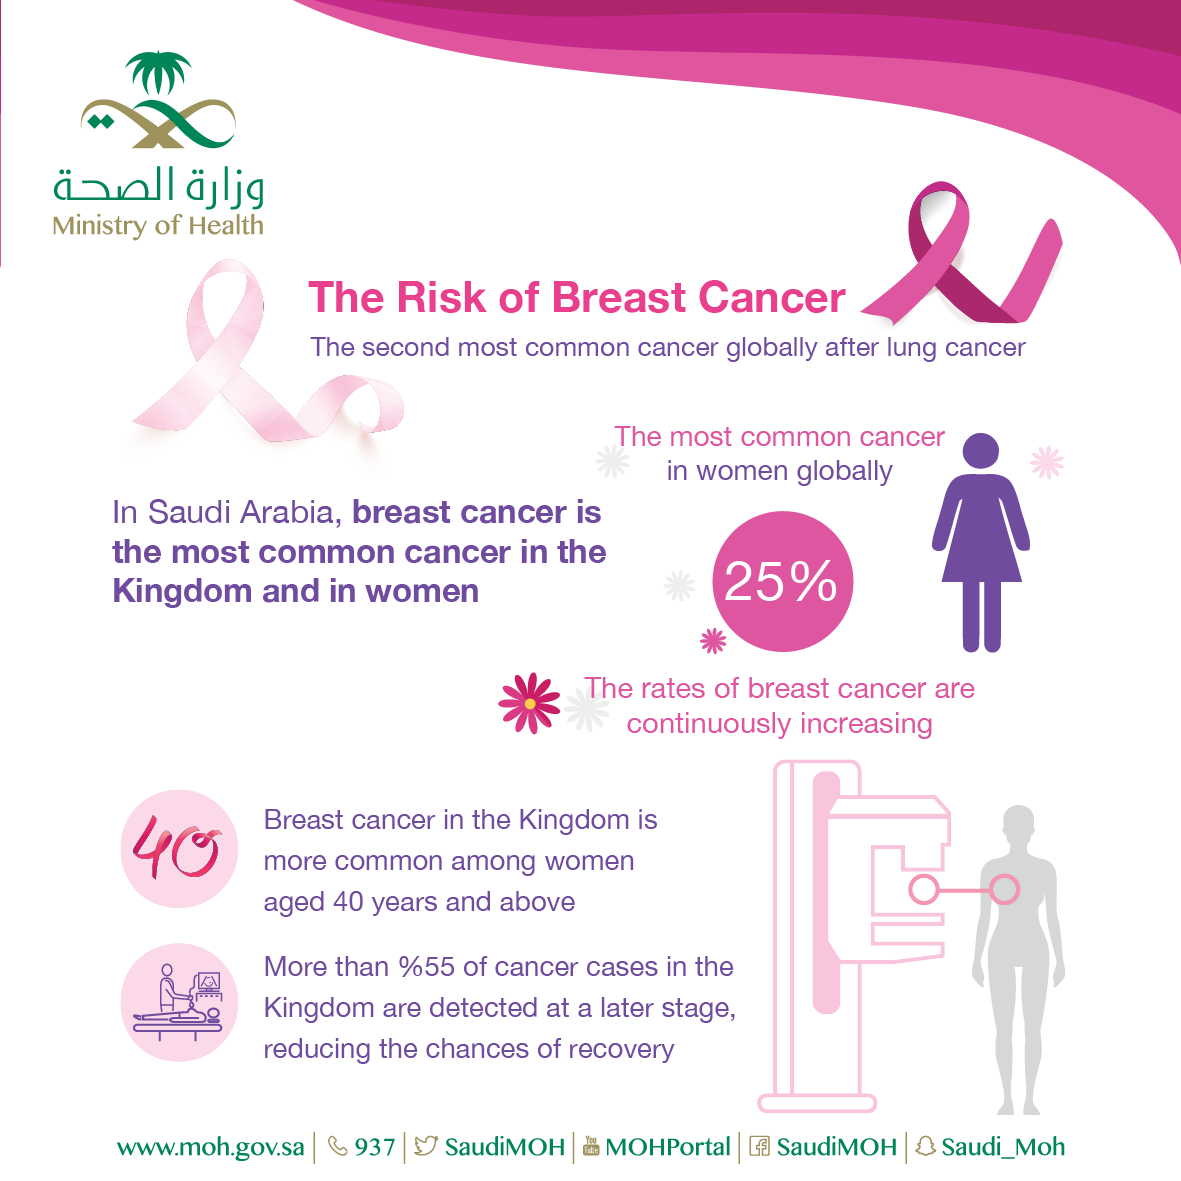 The Risk of Breast Cancer